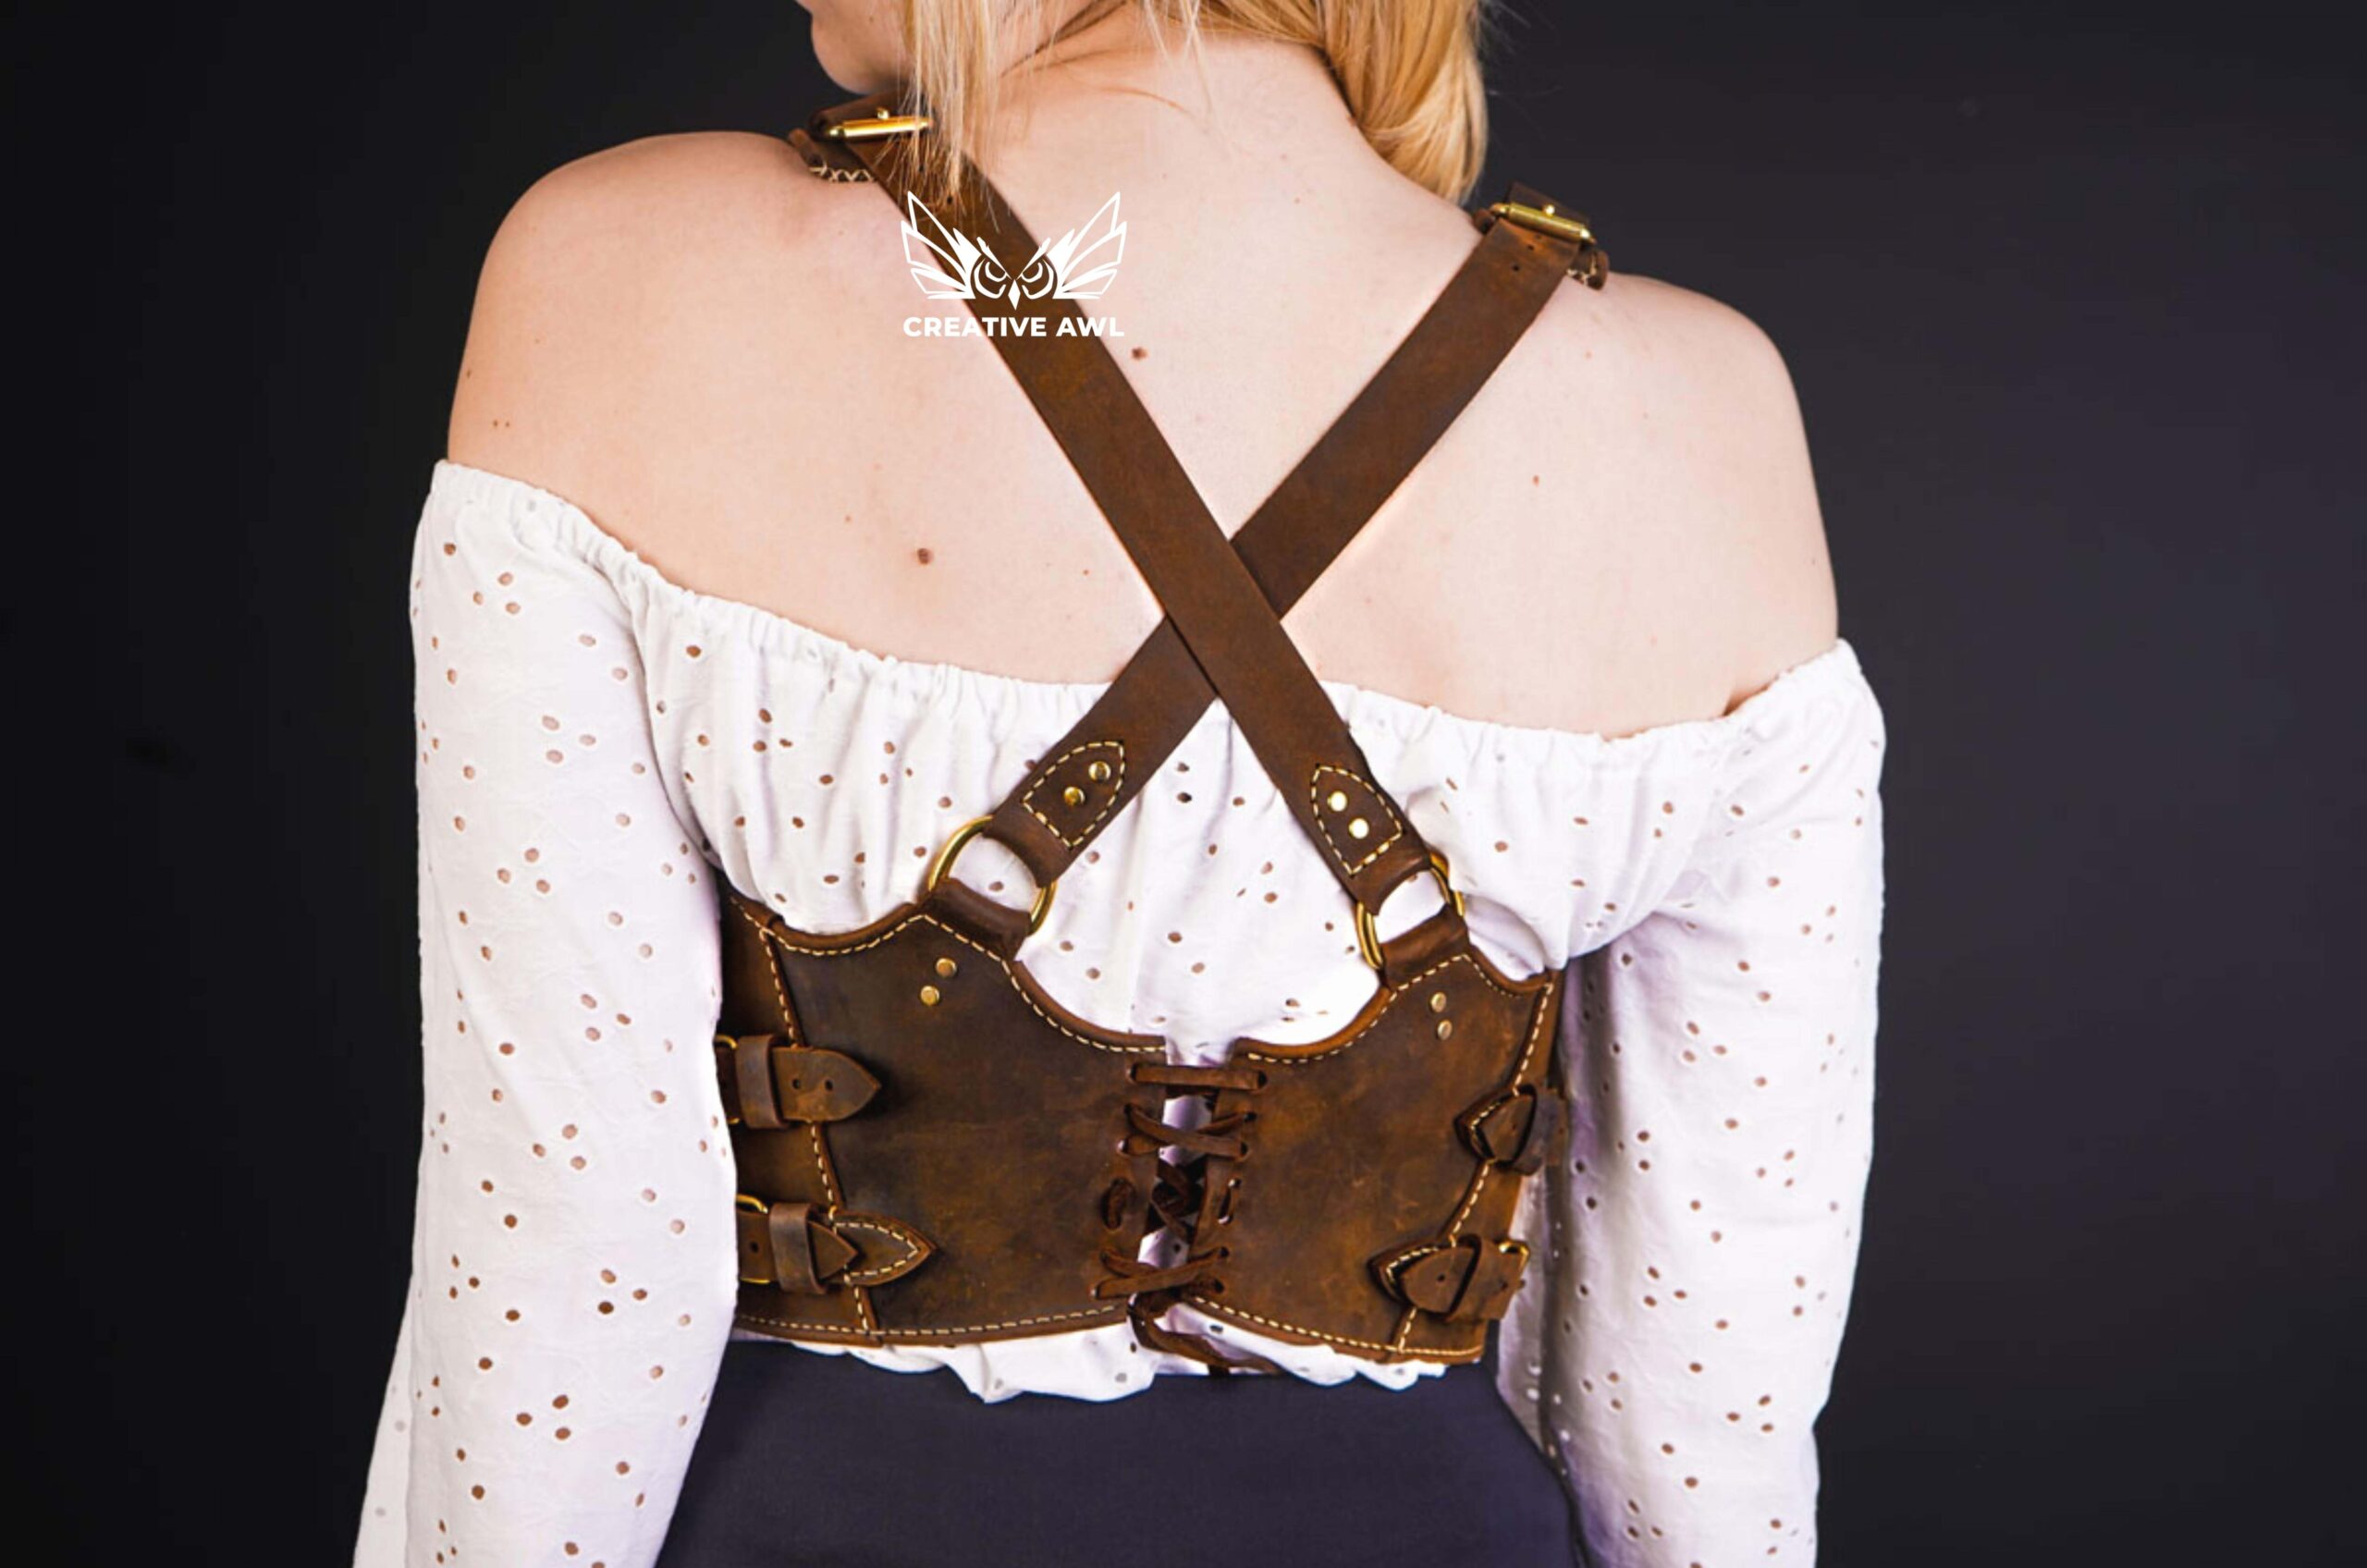 What is an Underbust Corset? (The Savvy Shopper Field Guide)